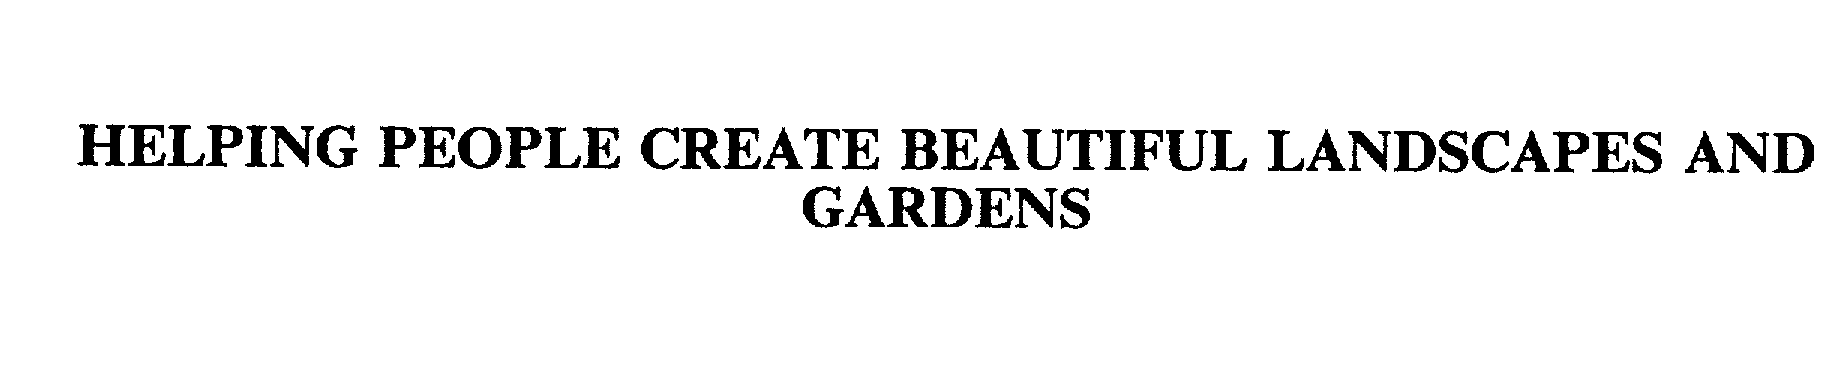  HELPING PEOPLE CREATE BEAUTIFUL LANDSCAPES AND GARDENS